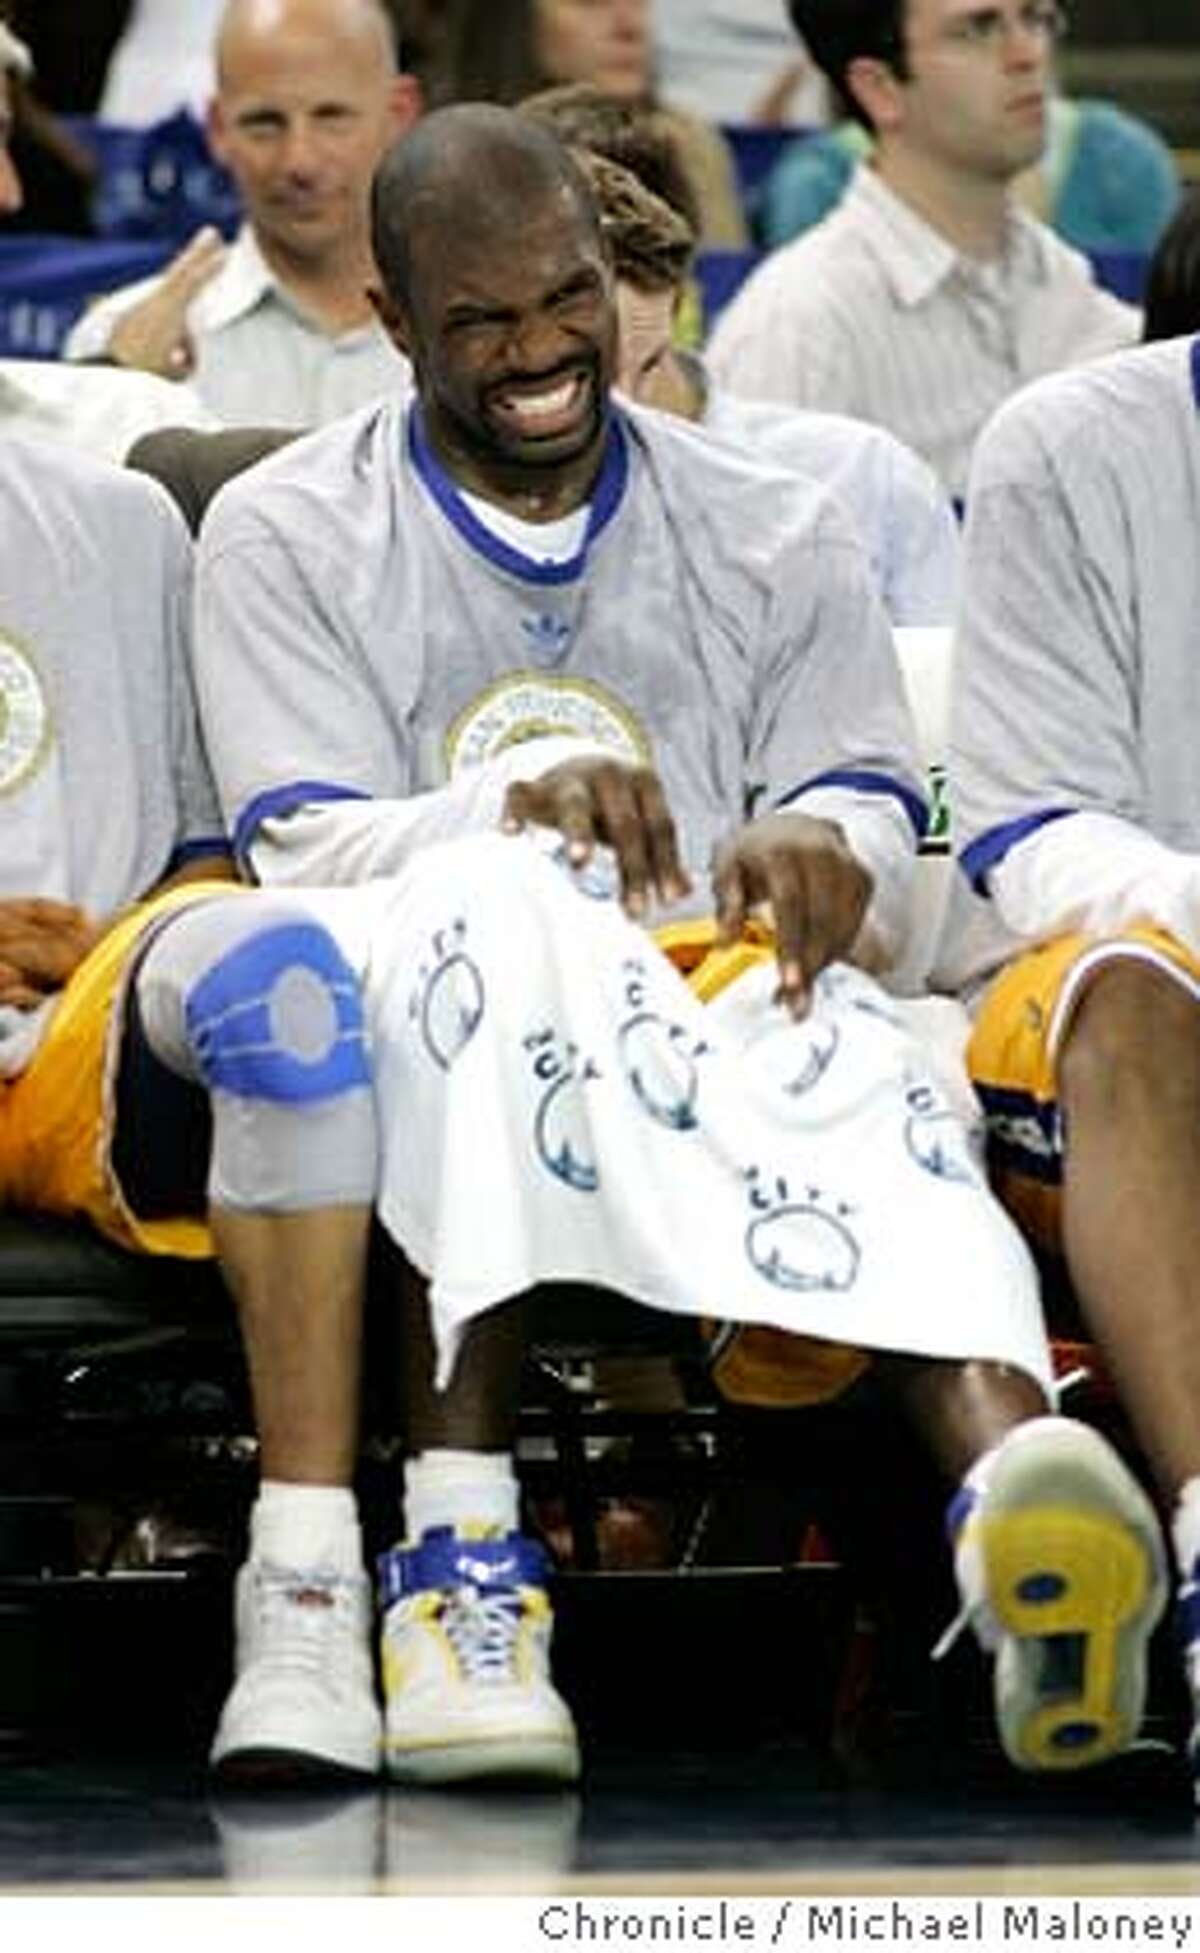 Warriors Jason Richardson (23) grimaces on the bench in the 4th quarter, his team behind by 40 points. The Golden State Warriors hosted the San Antonio Spurs at Oracle Arena in Oakland, CA on March 26, 2007. Photo by Michael Maloney / San Francisco Chronicle MANDATORY CREDIT FOR PHOTOG AND SF CHRONICLE/NO SALES-MAGS OUT